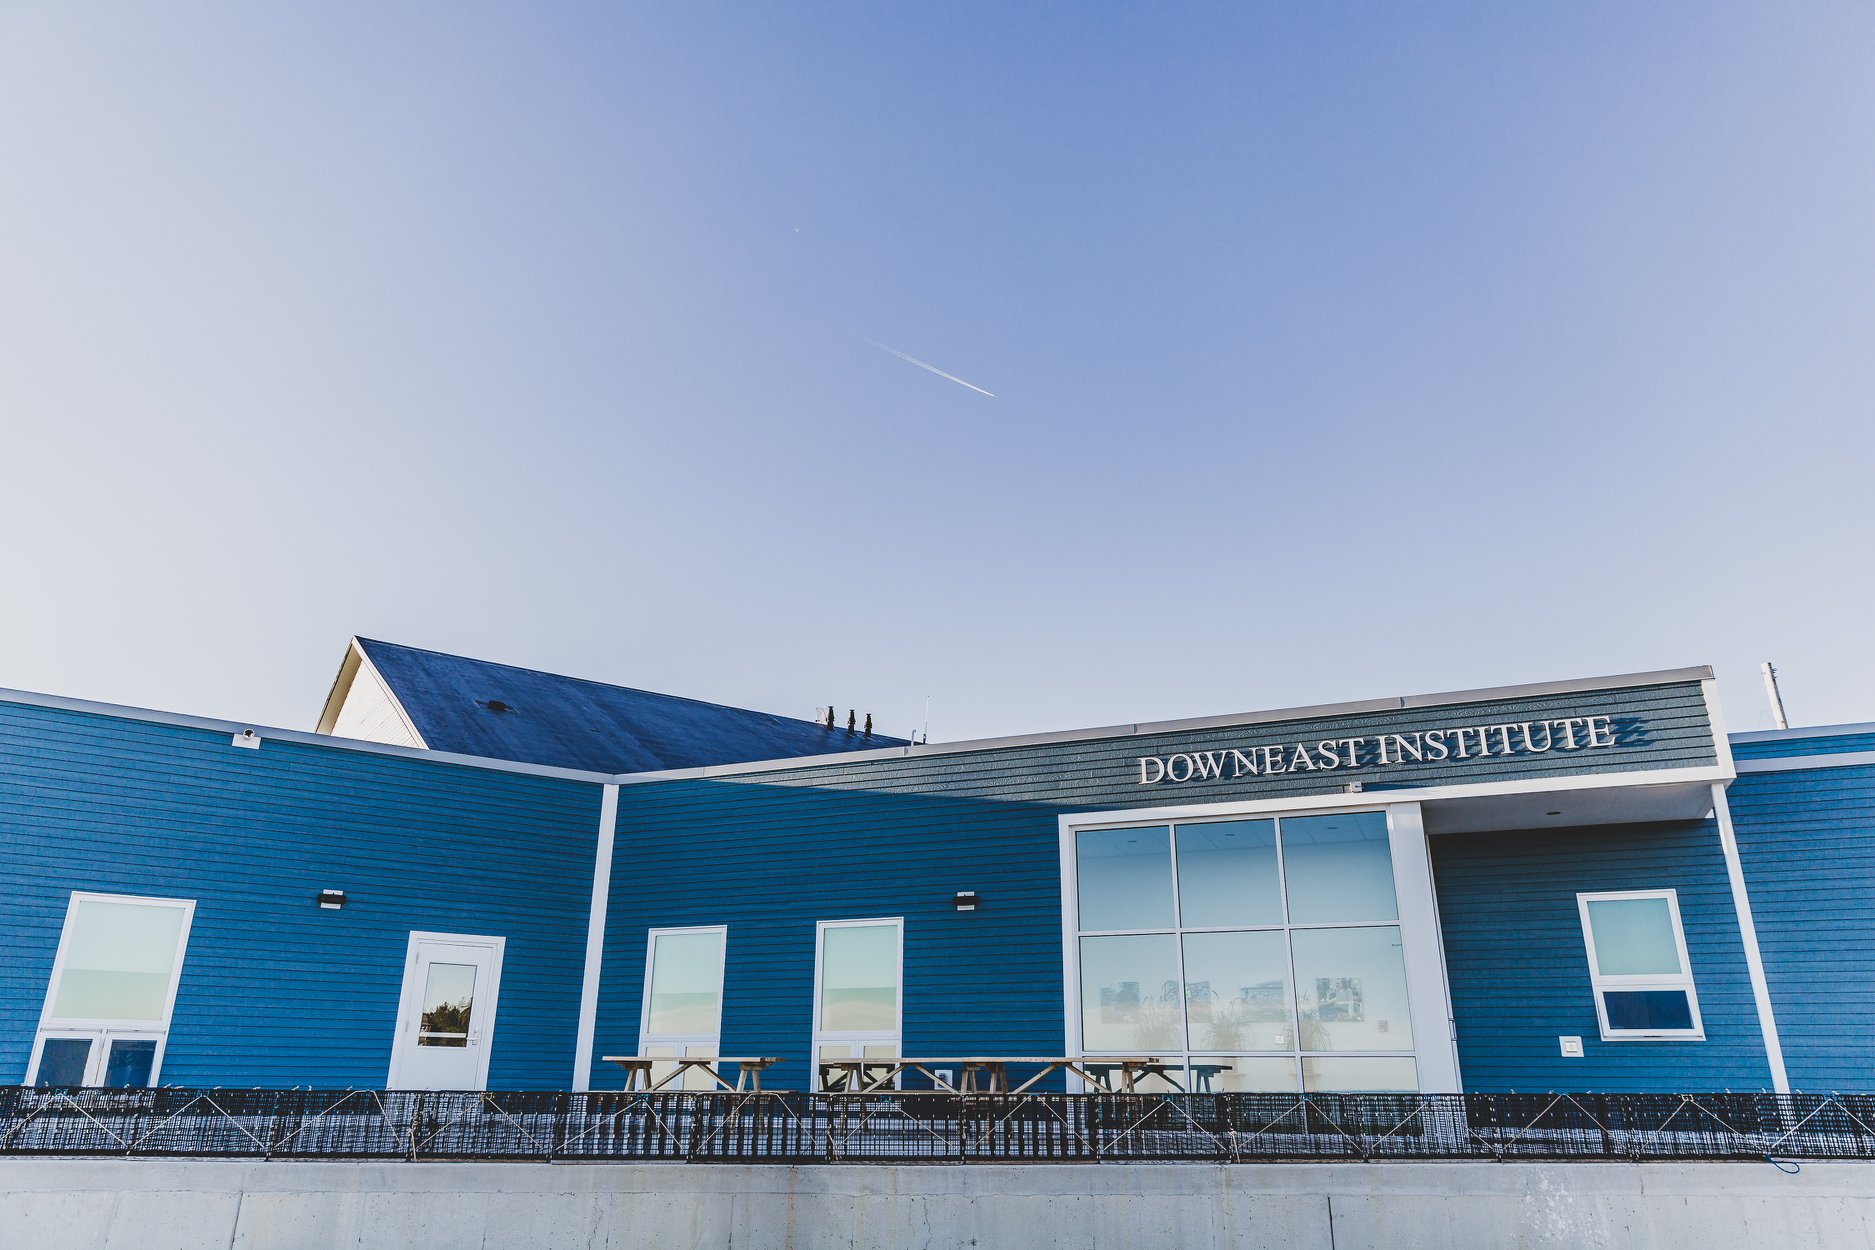 exterior photo of the downeast institute building